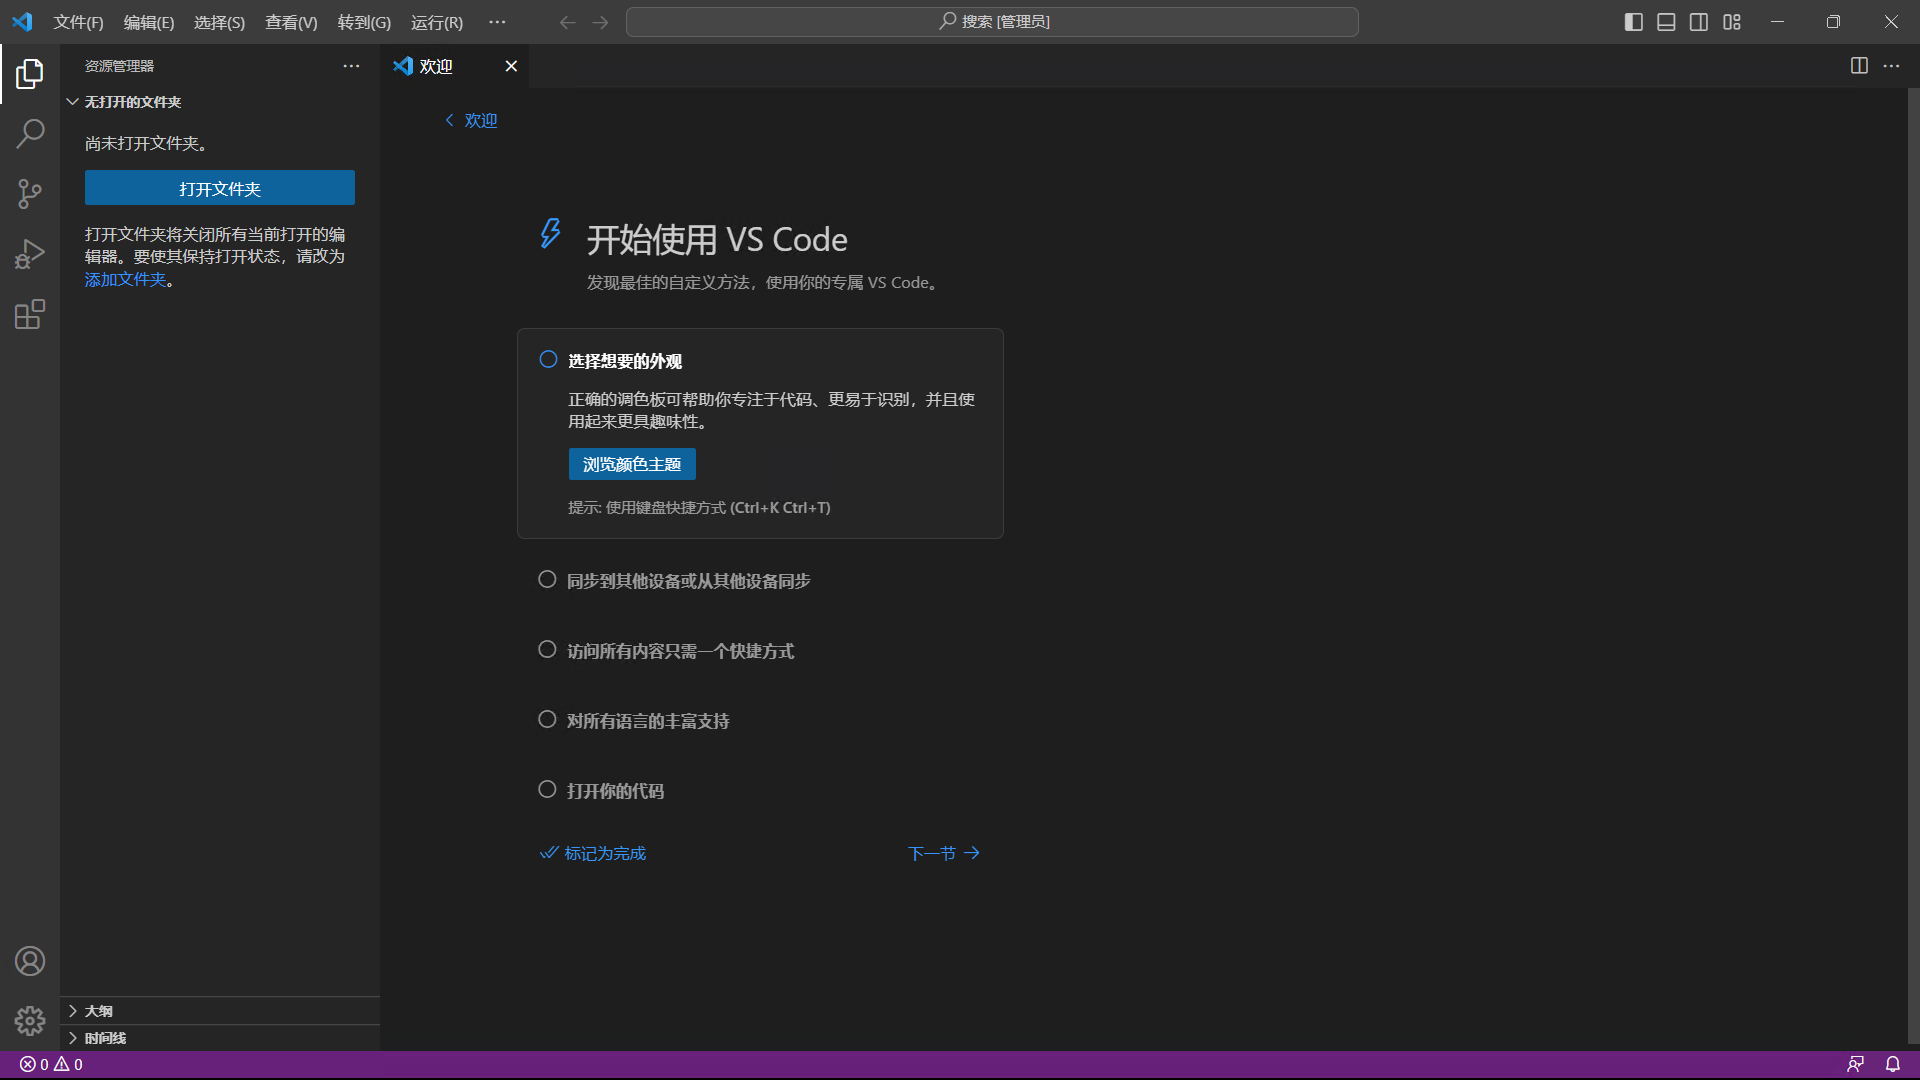 VSCode Welcome